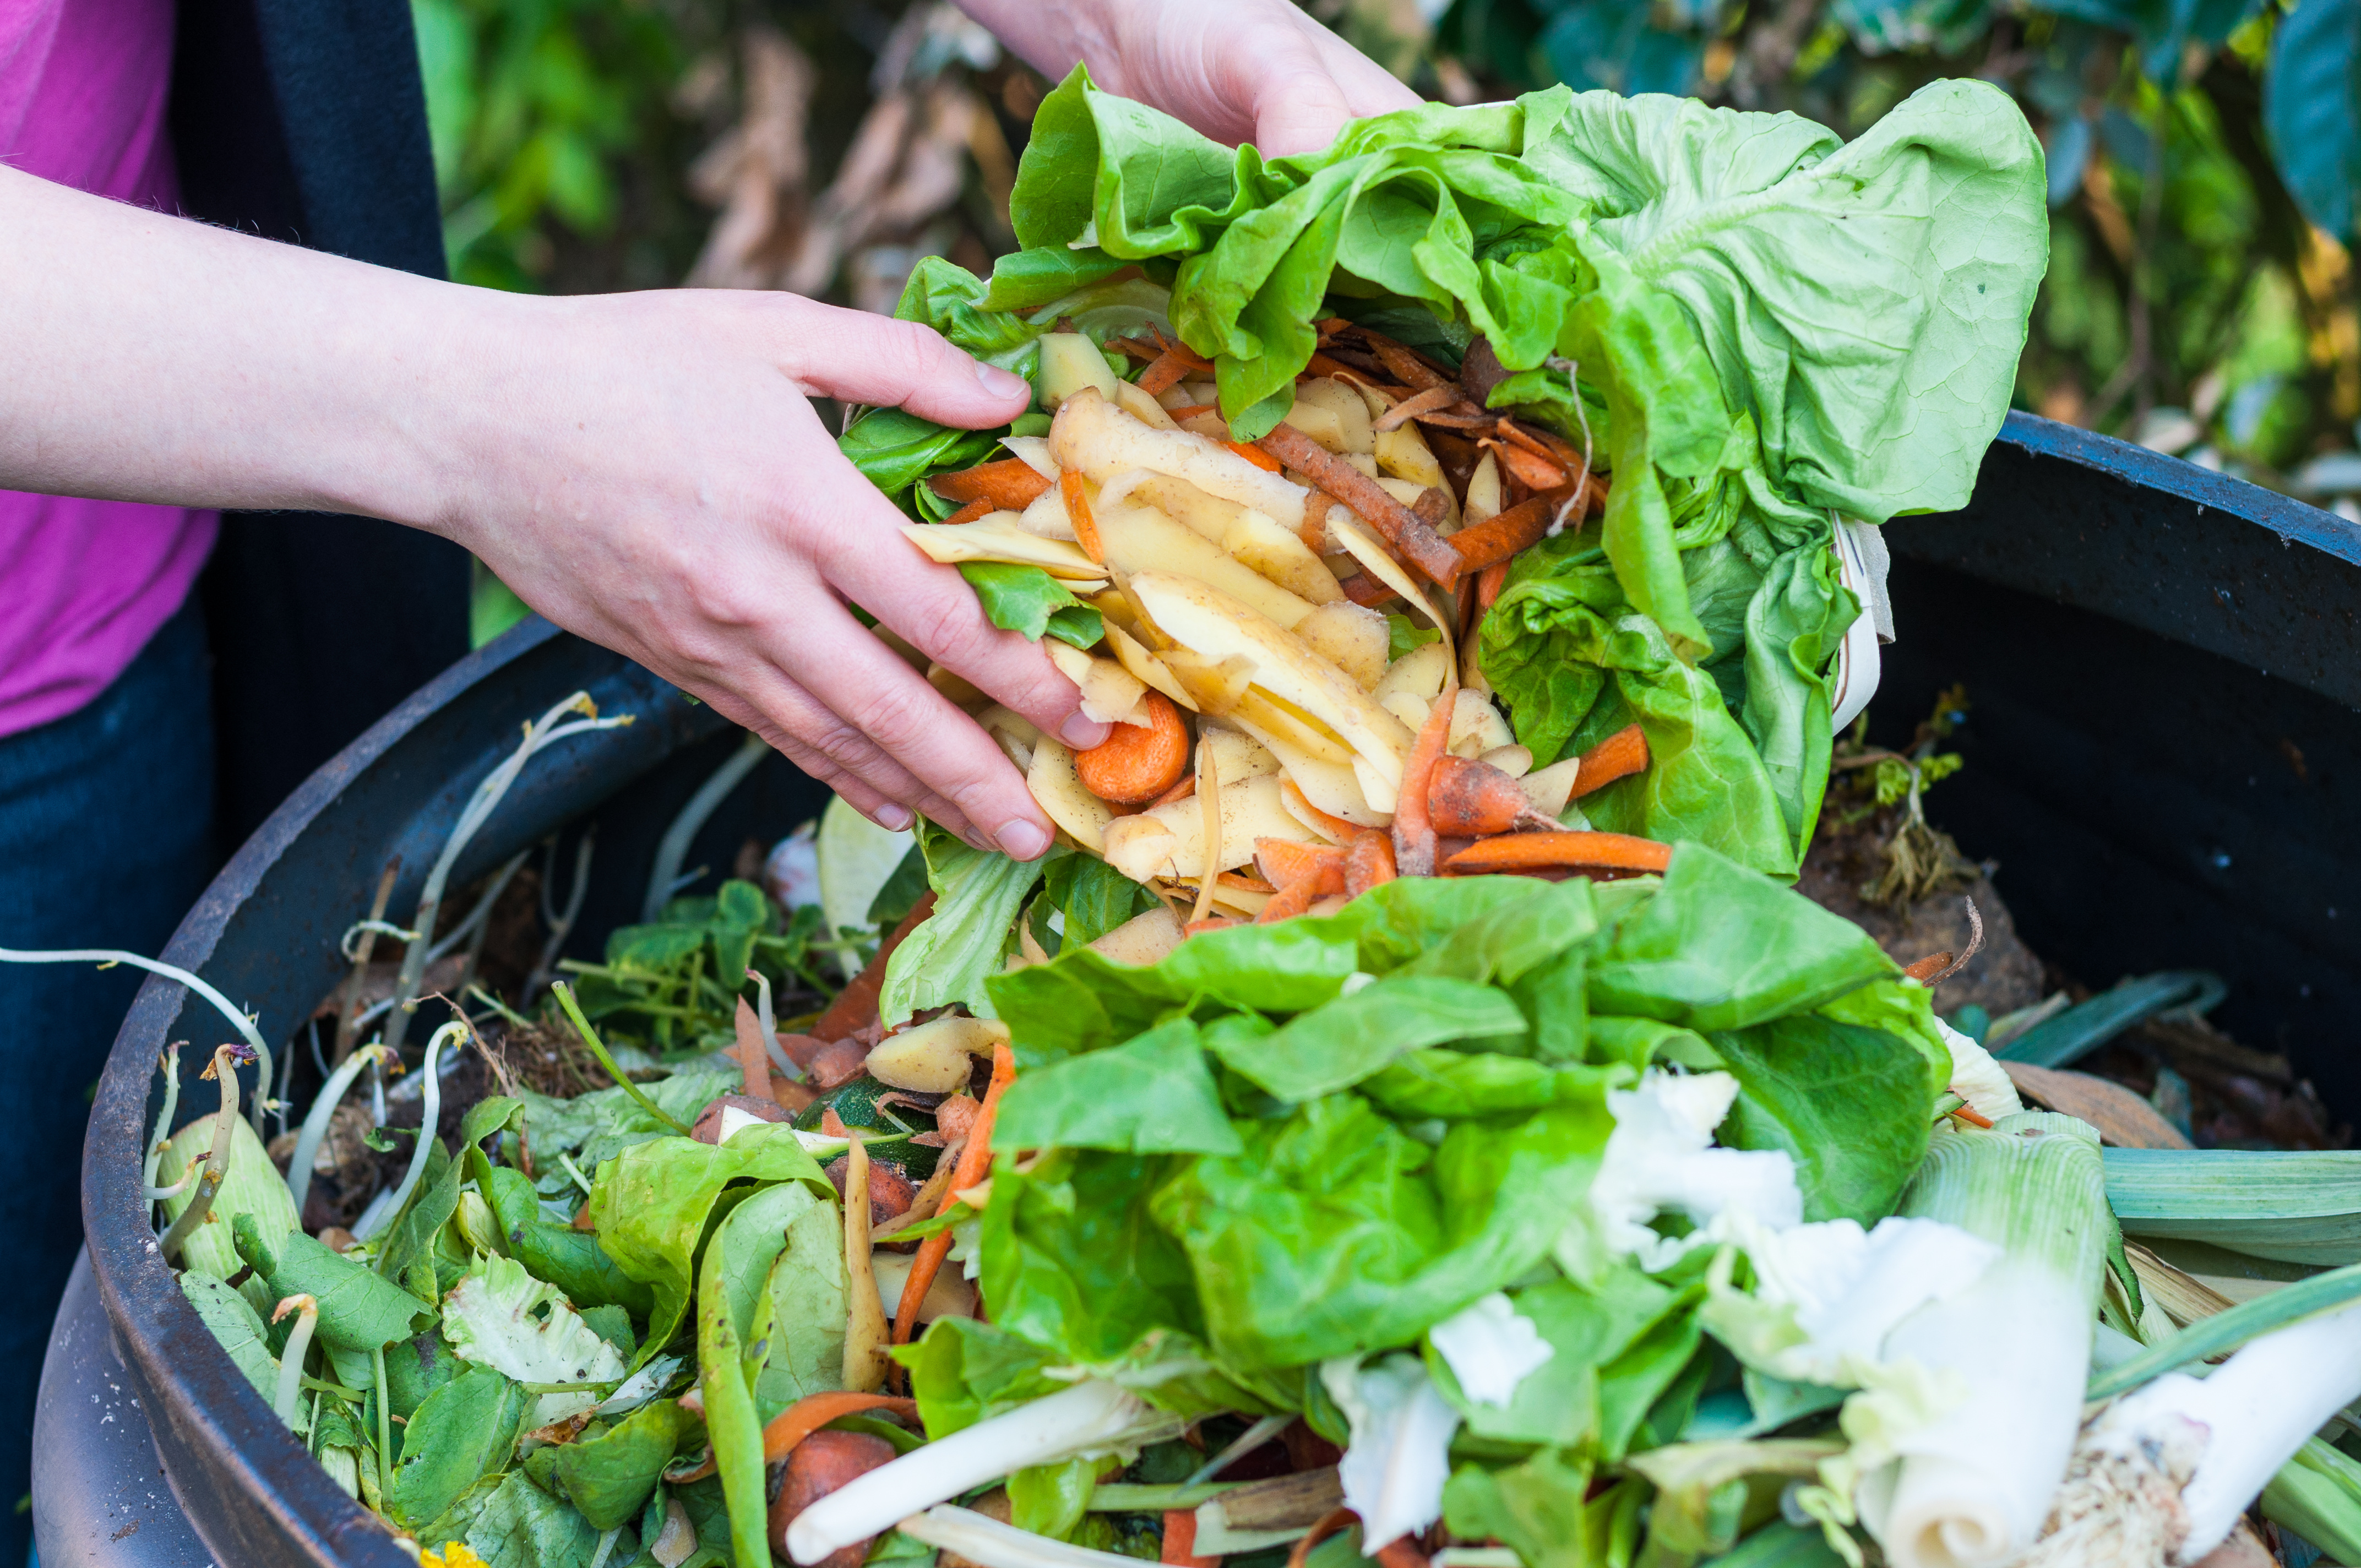 Food waste in compost